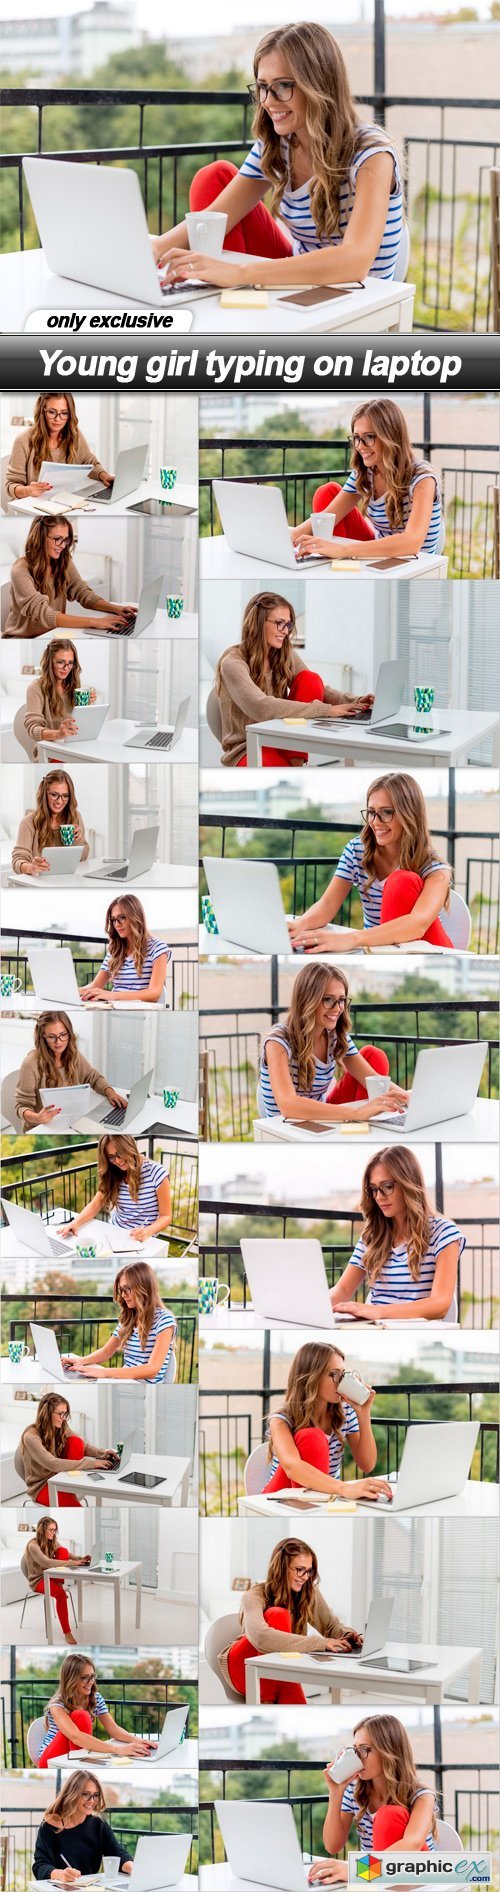 Young girl typing on laptop - 20 UHQ JPEG